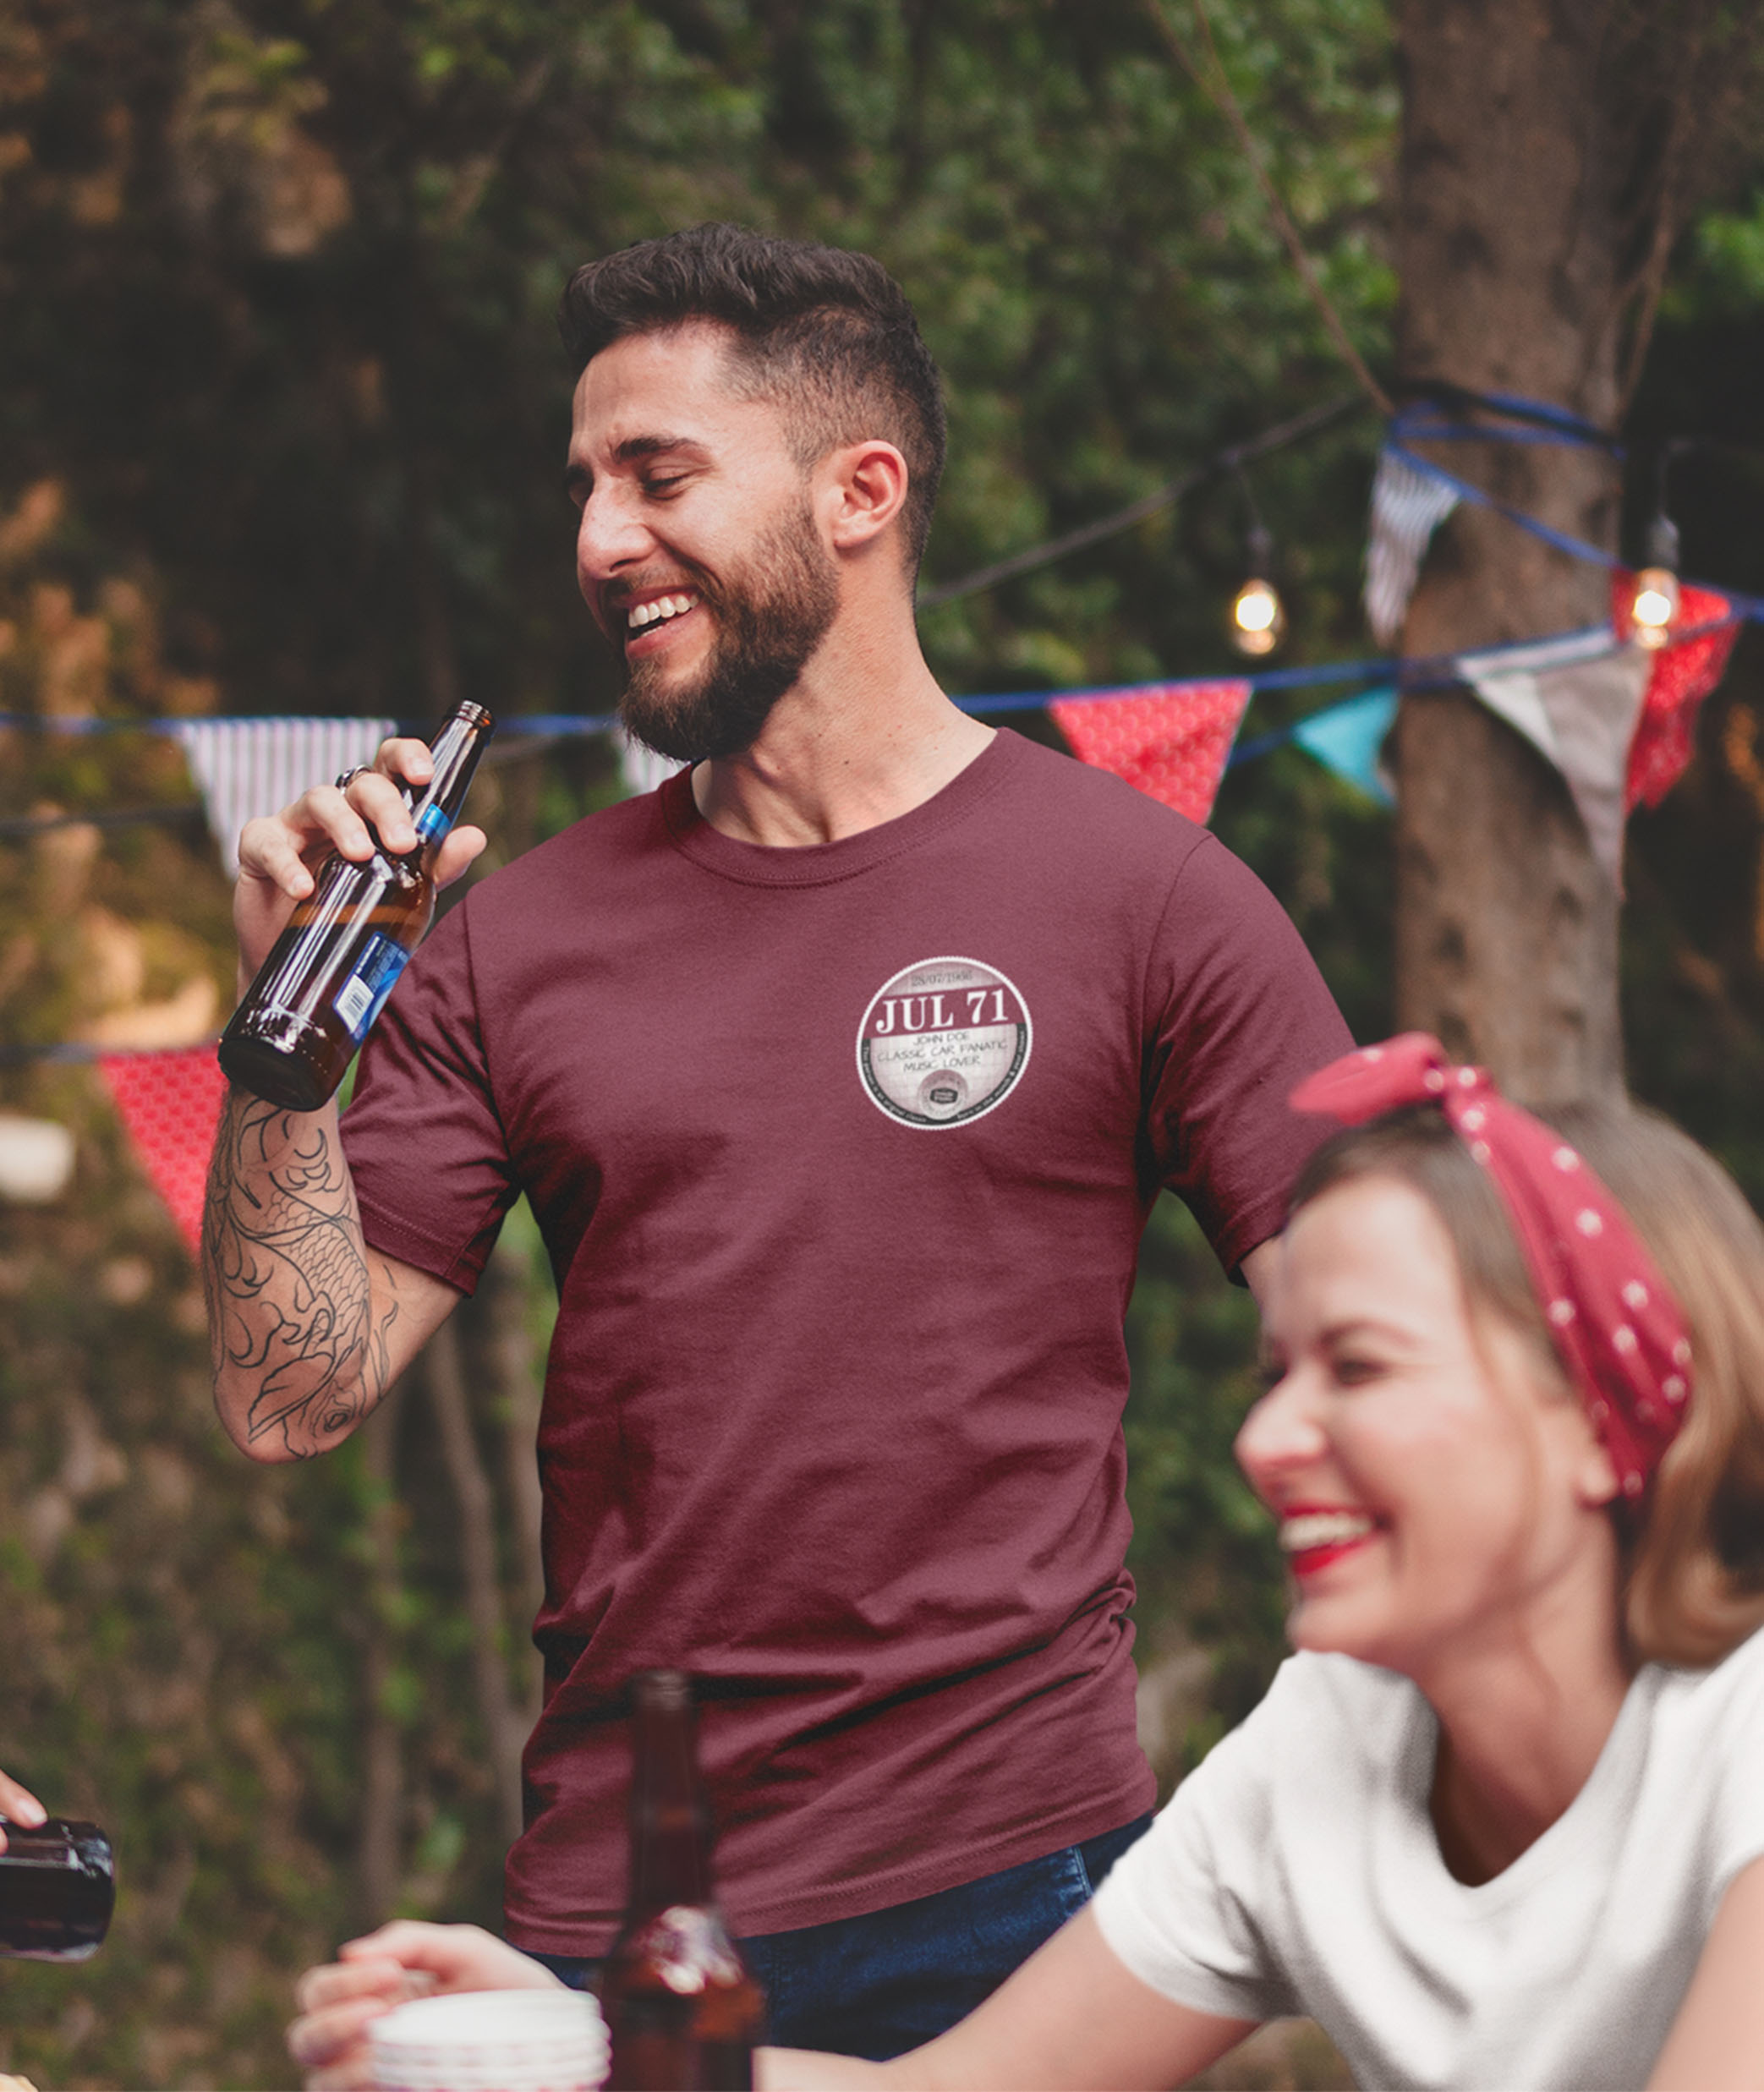 Man with beer wearing maroon July 71 left chest tax disc t shirt